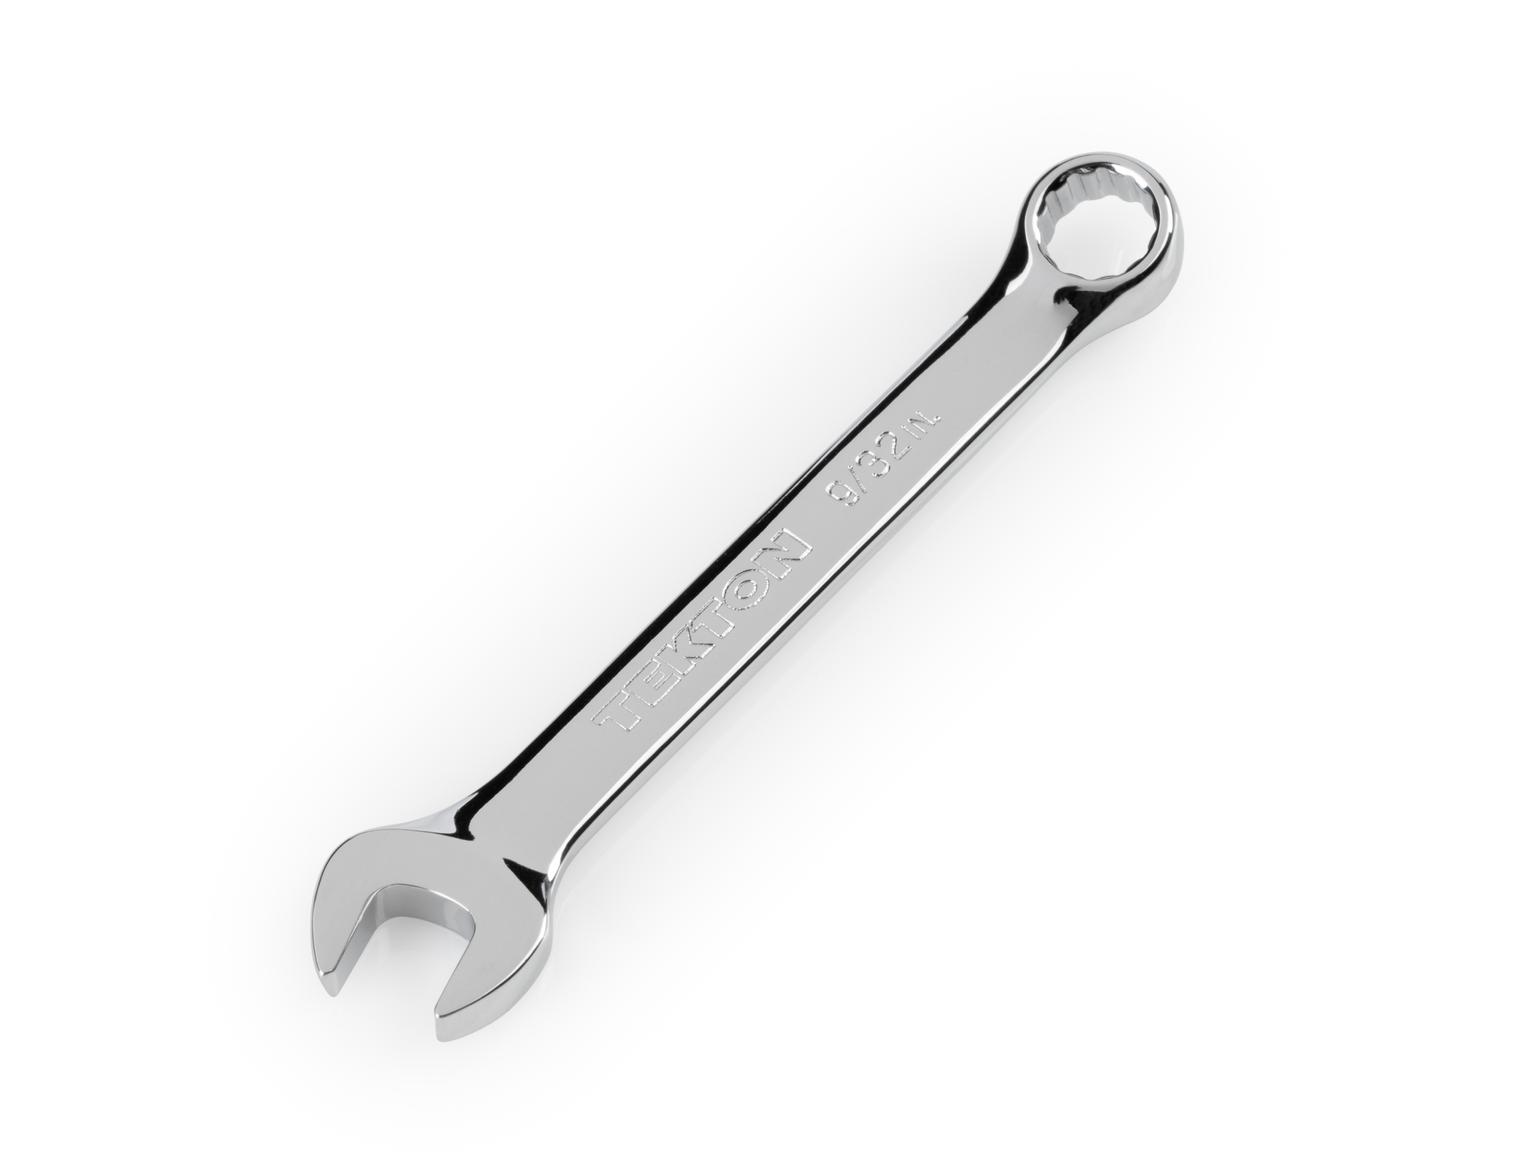 TEKTON 18042-T 9/32 Inch Stubby Combination Wrench